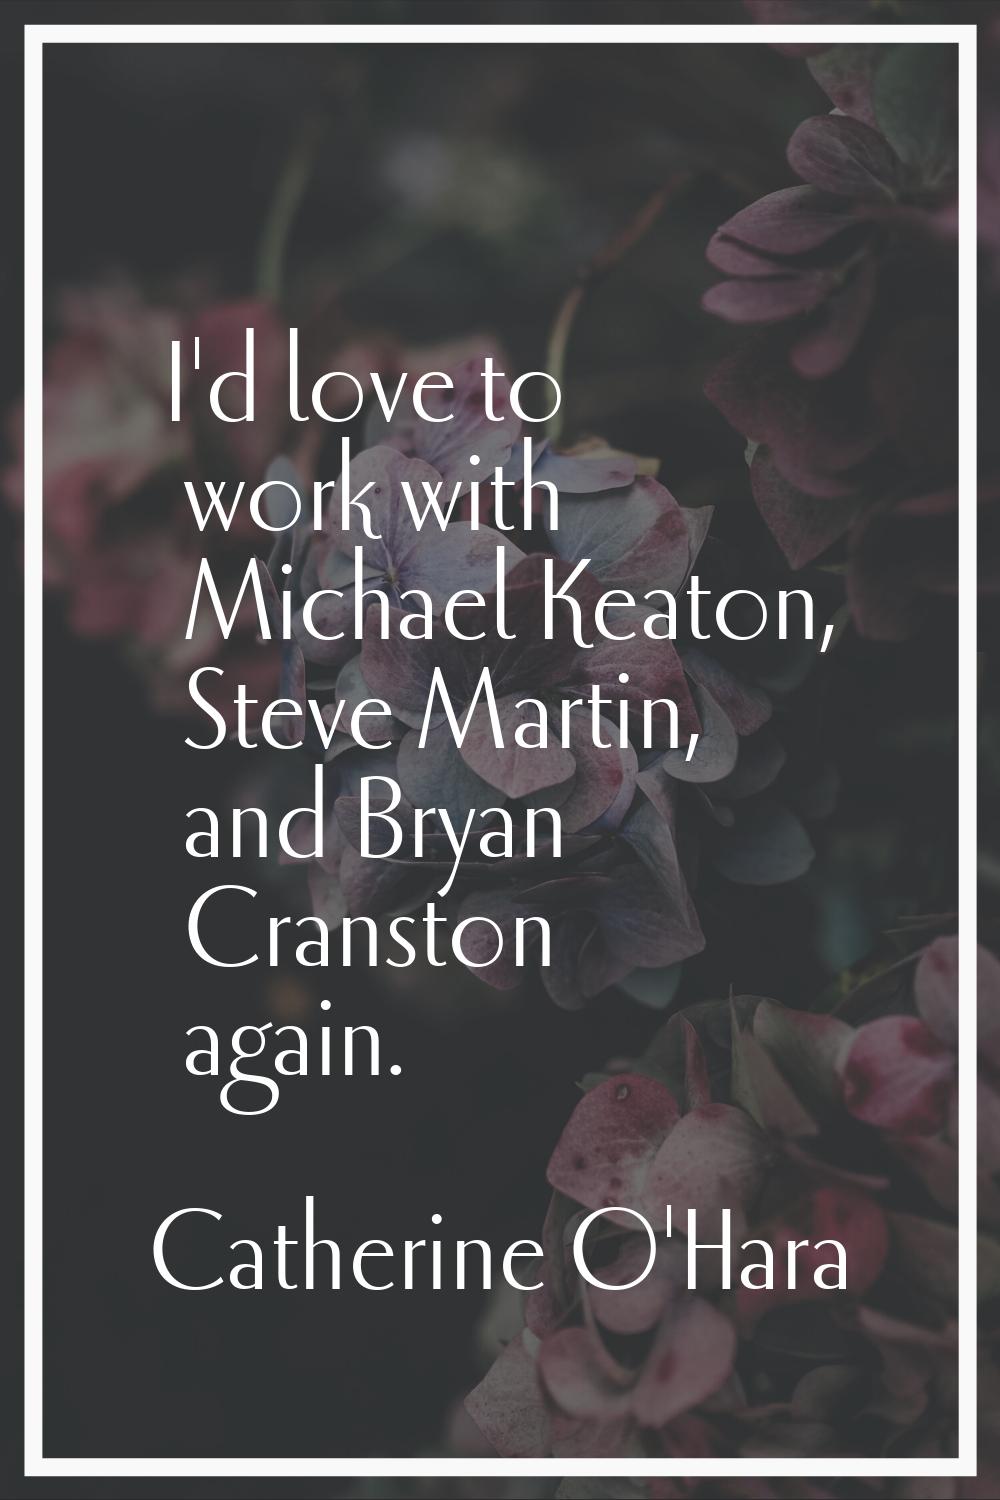 I'd love to work with Michael Keaton, Steve Martin, and Bryan Cranston again.